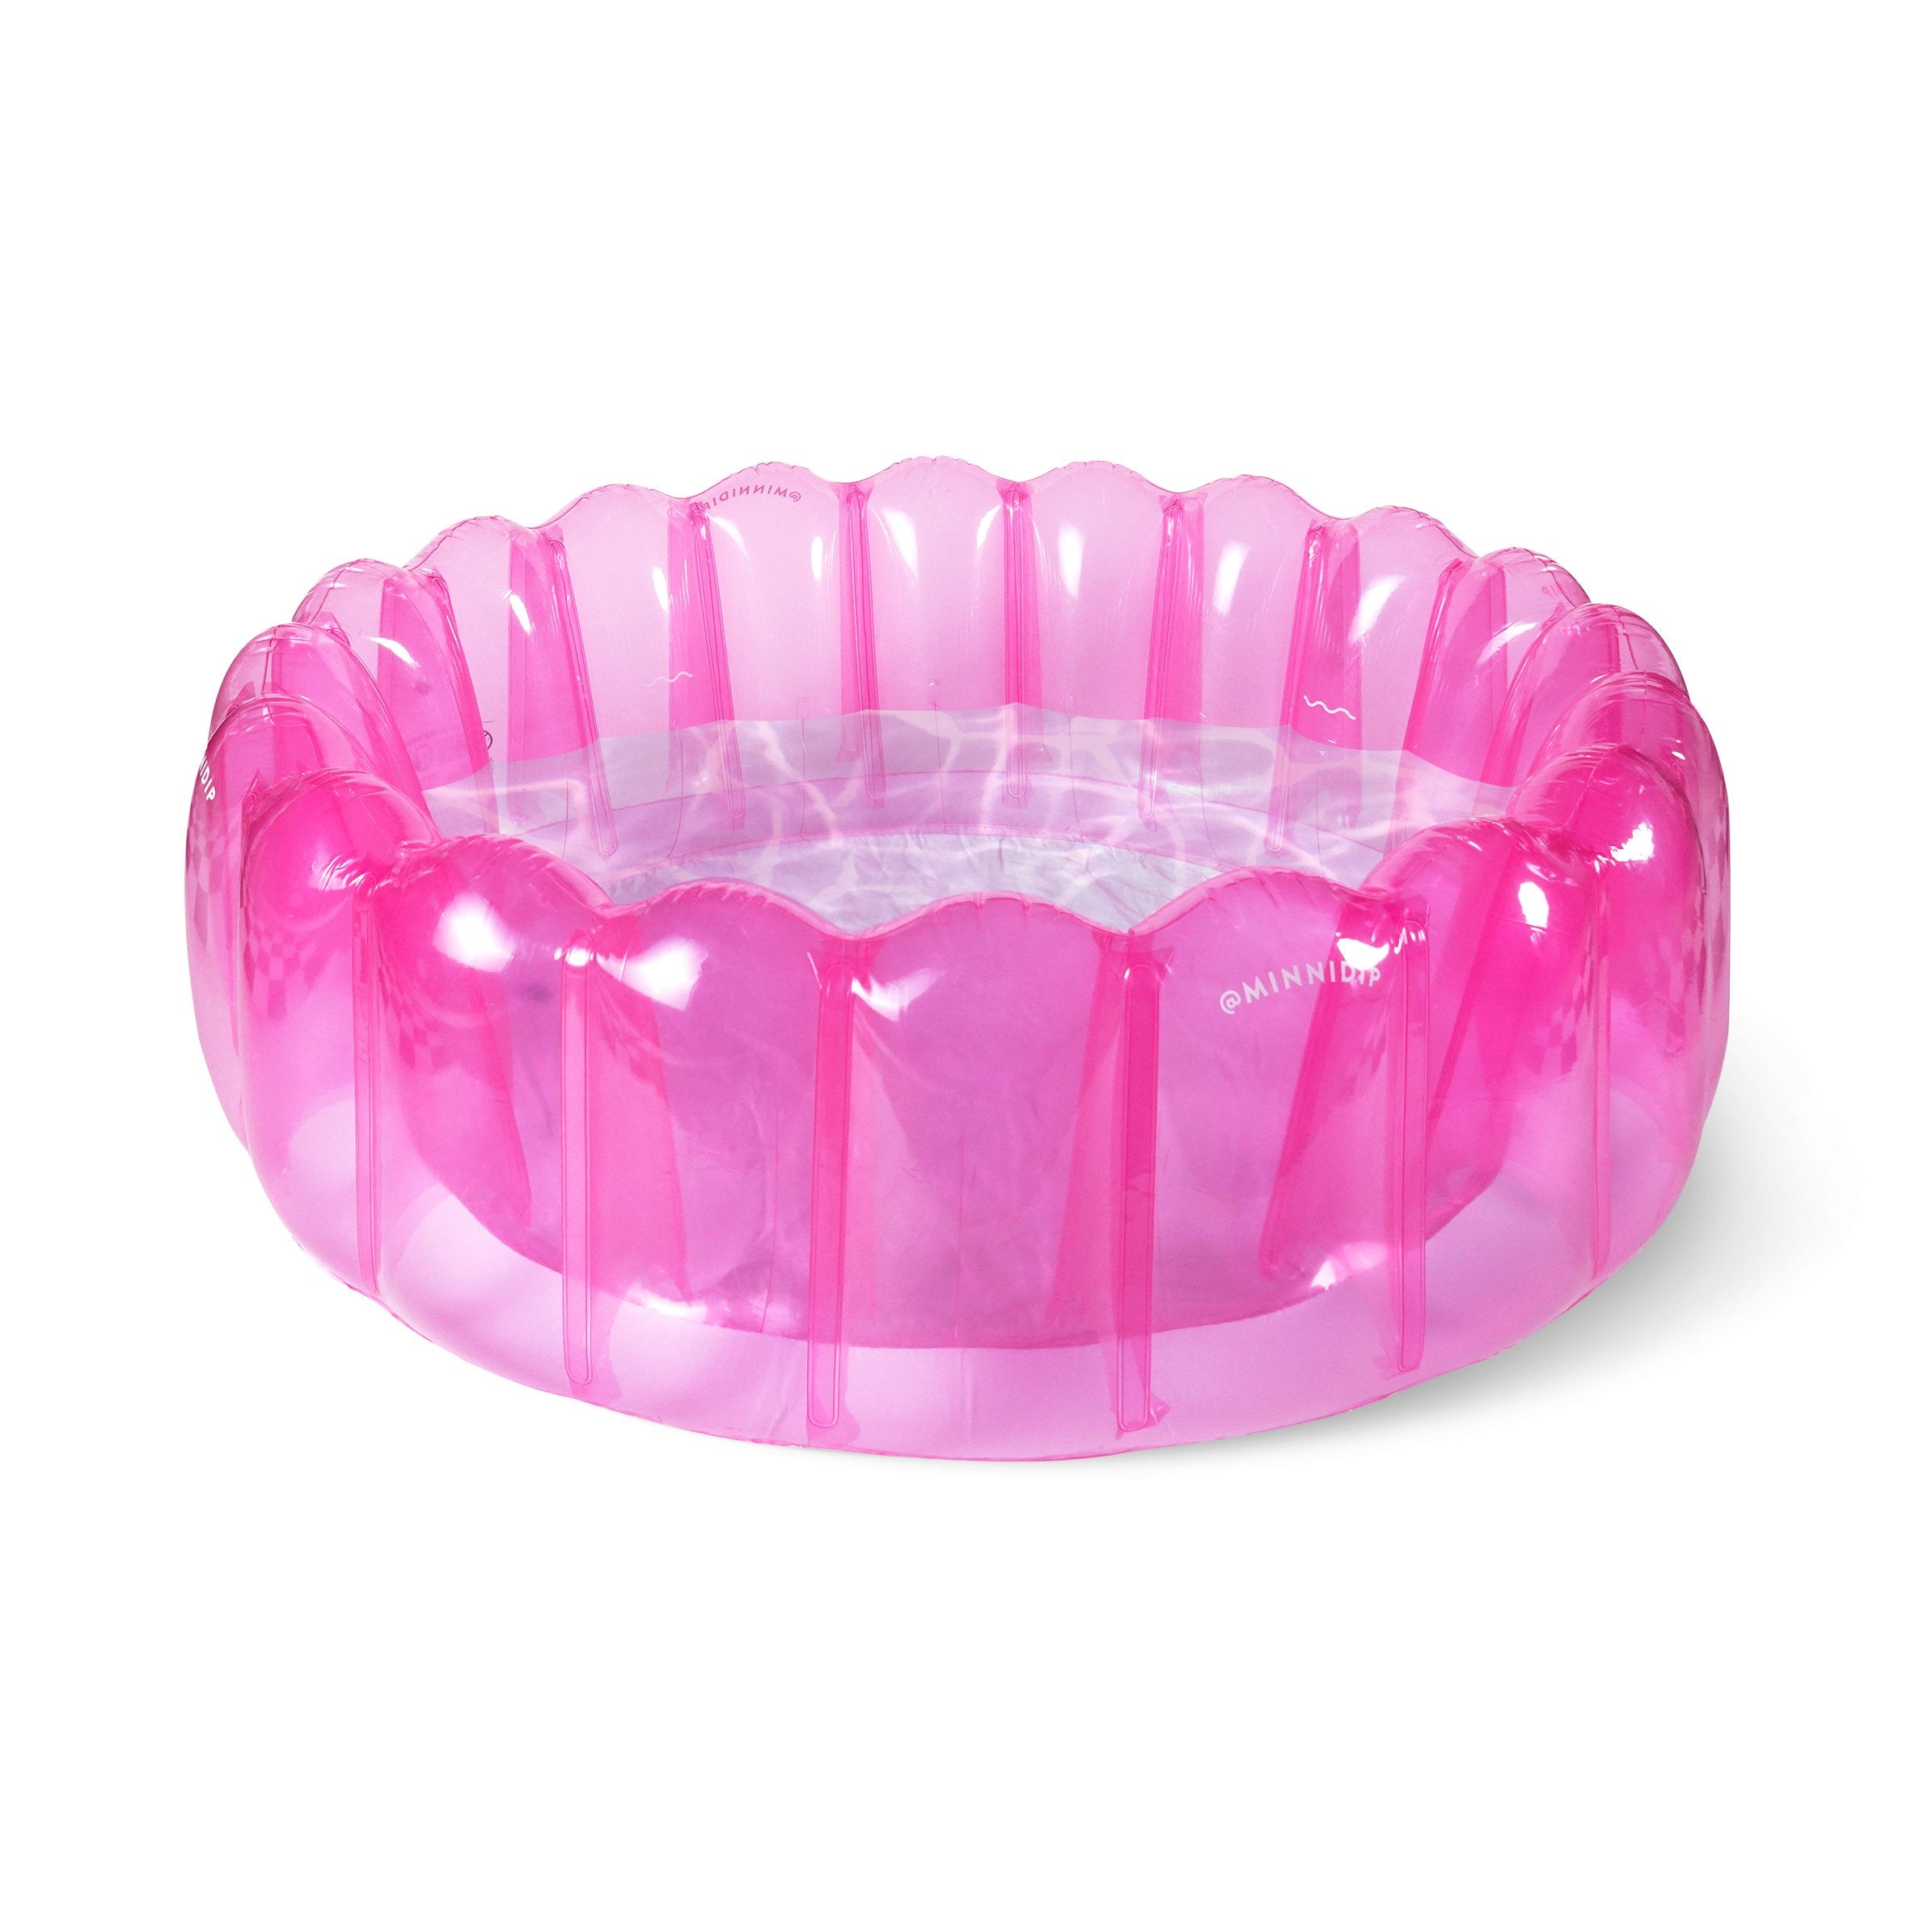 the CLEARLY HOT PINK TUFTED luxe inflatable pool